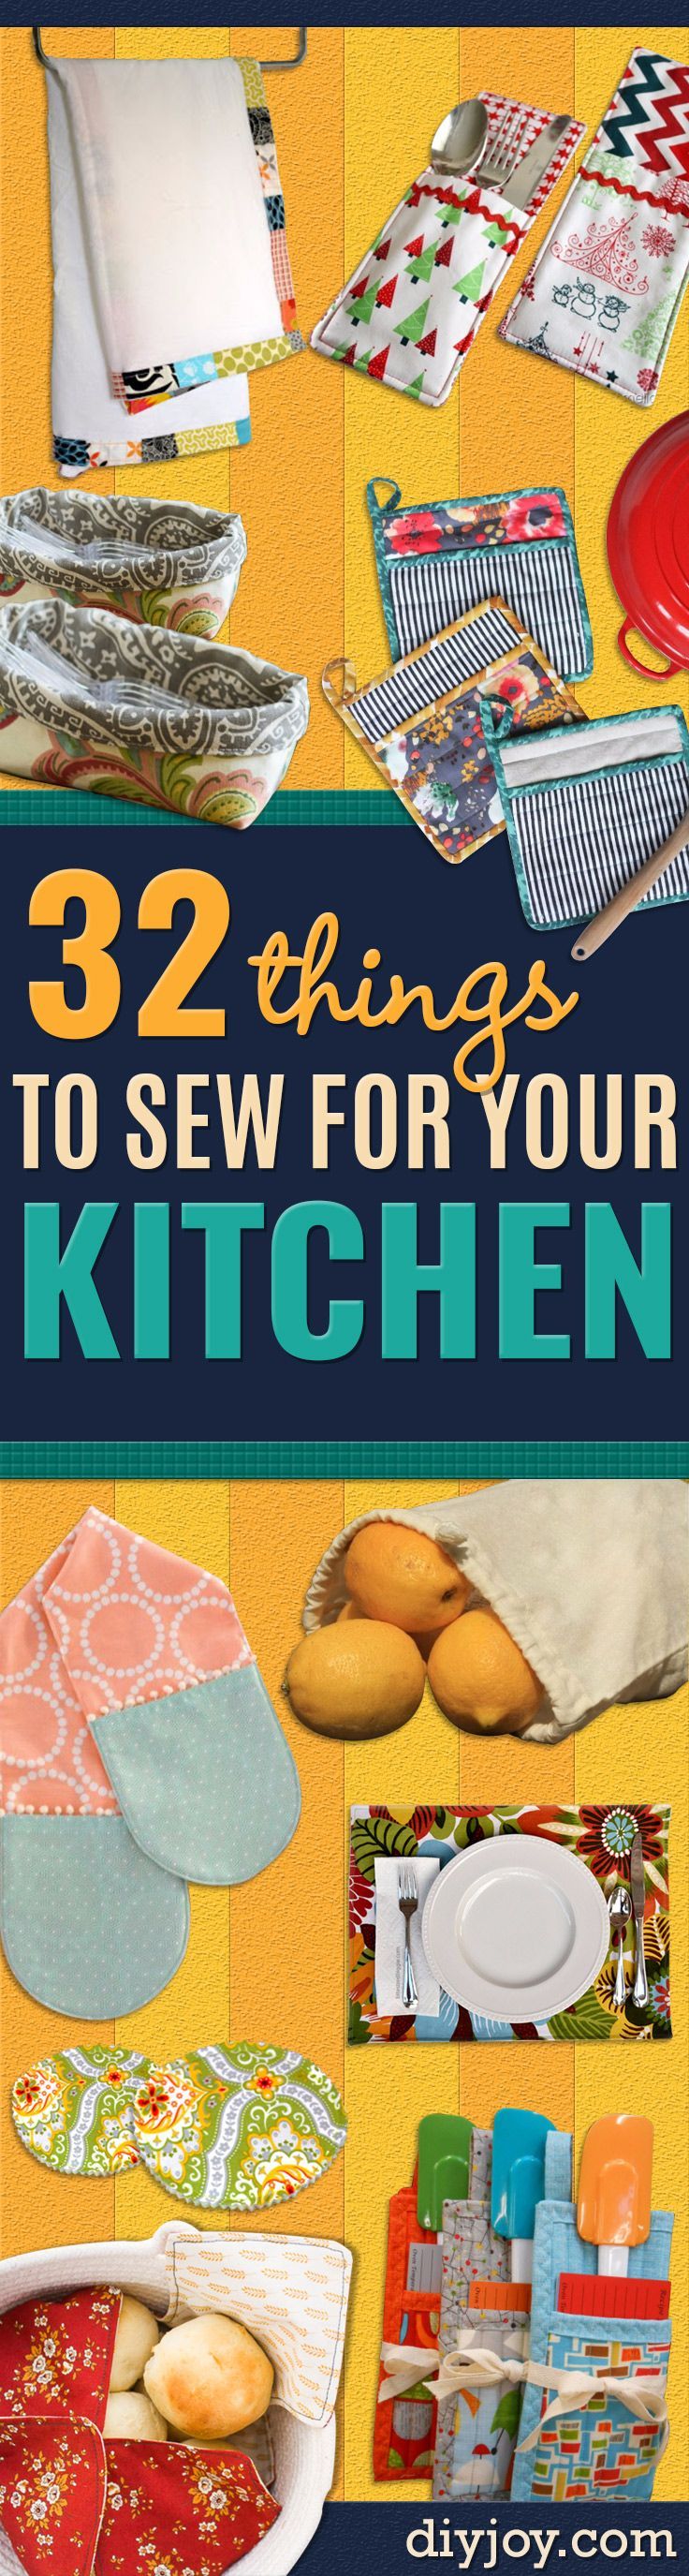 DIY Sewing Projects for the Kitchen – Easy Sewing Tutorials and Patterns for Towel